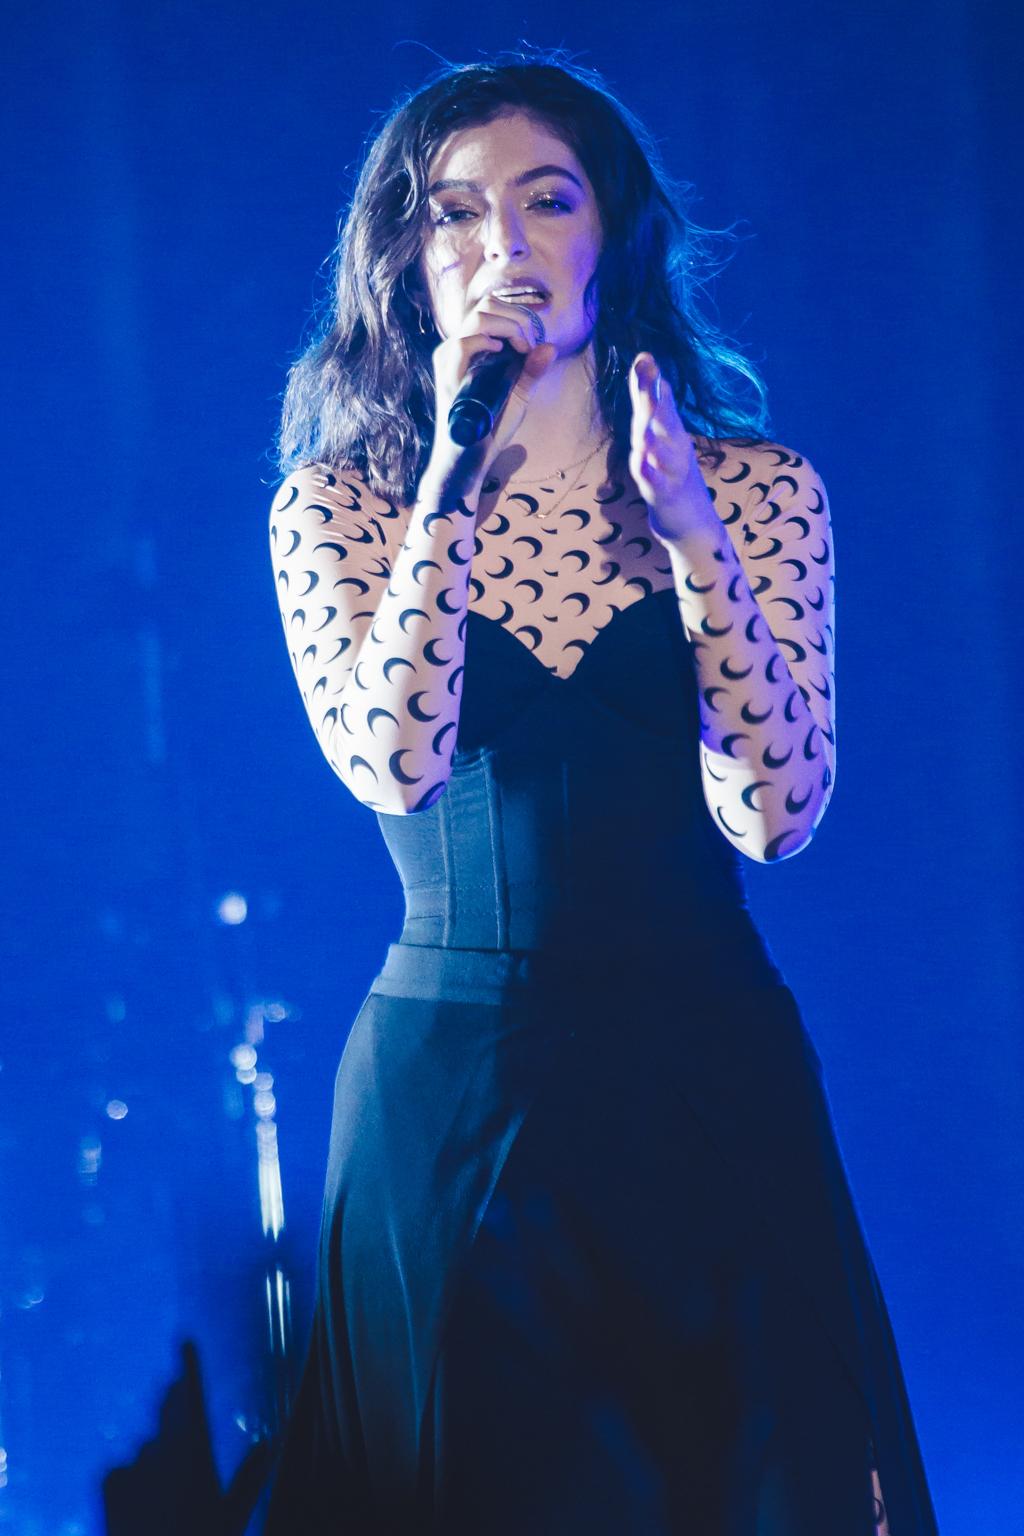 Lorde performs at the Manchester Apollo on the opening night of her 2017 18 world tour